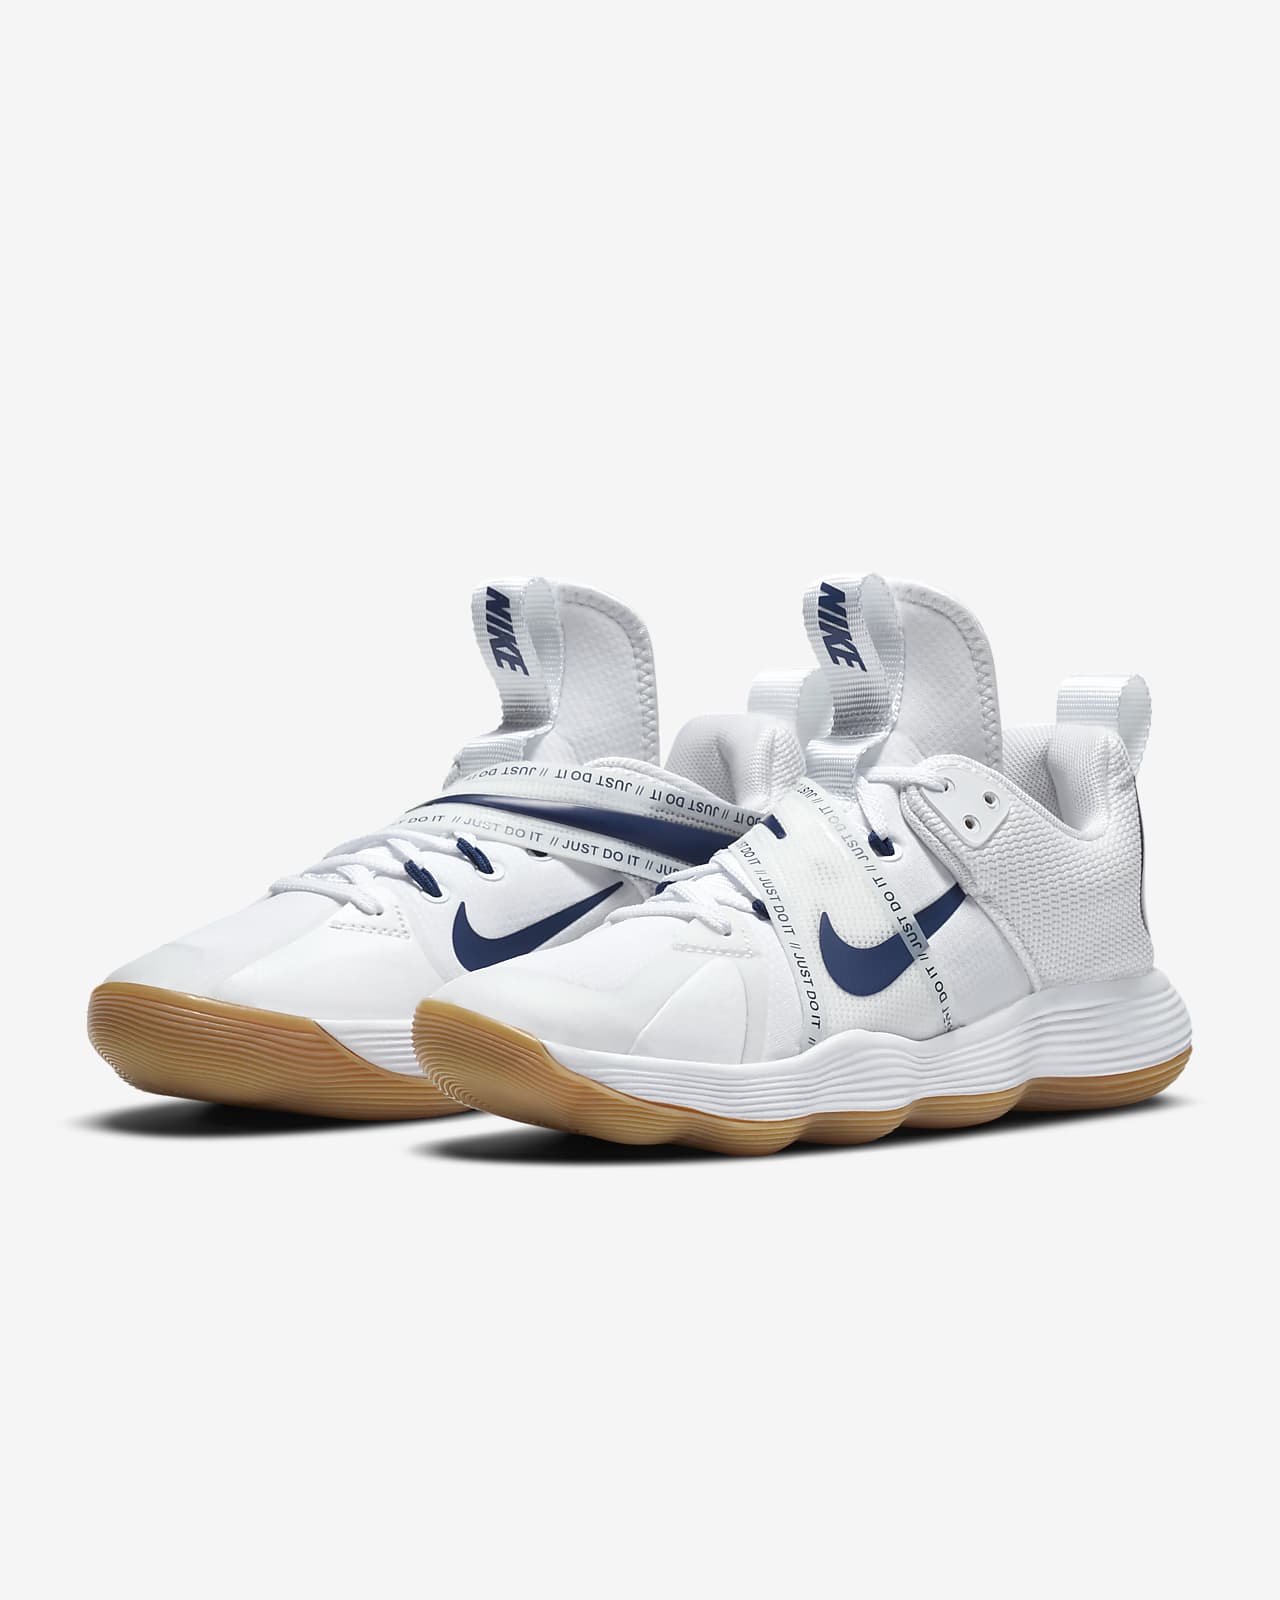 nike volleyball shoes near me